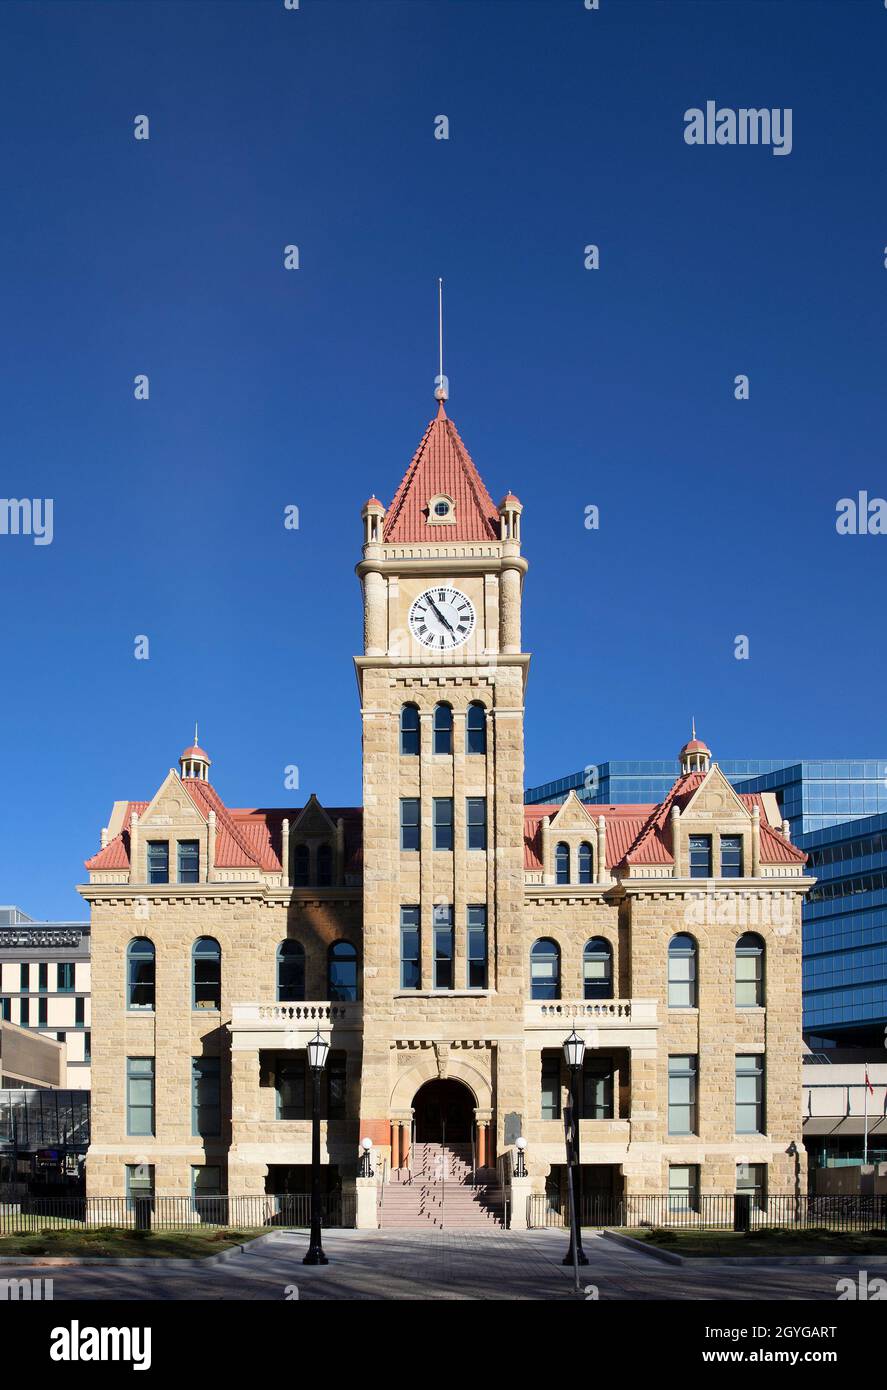 Calgary city hall with clock tower, a 1911 building made of Paskapoo sandstone, rehabilitated in 2020. It has been designated a National Historic Site Stock Photo